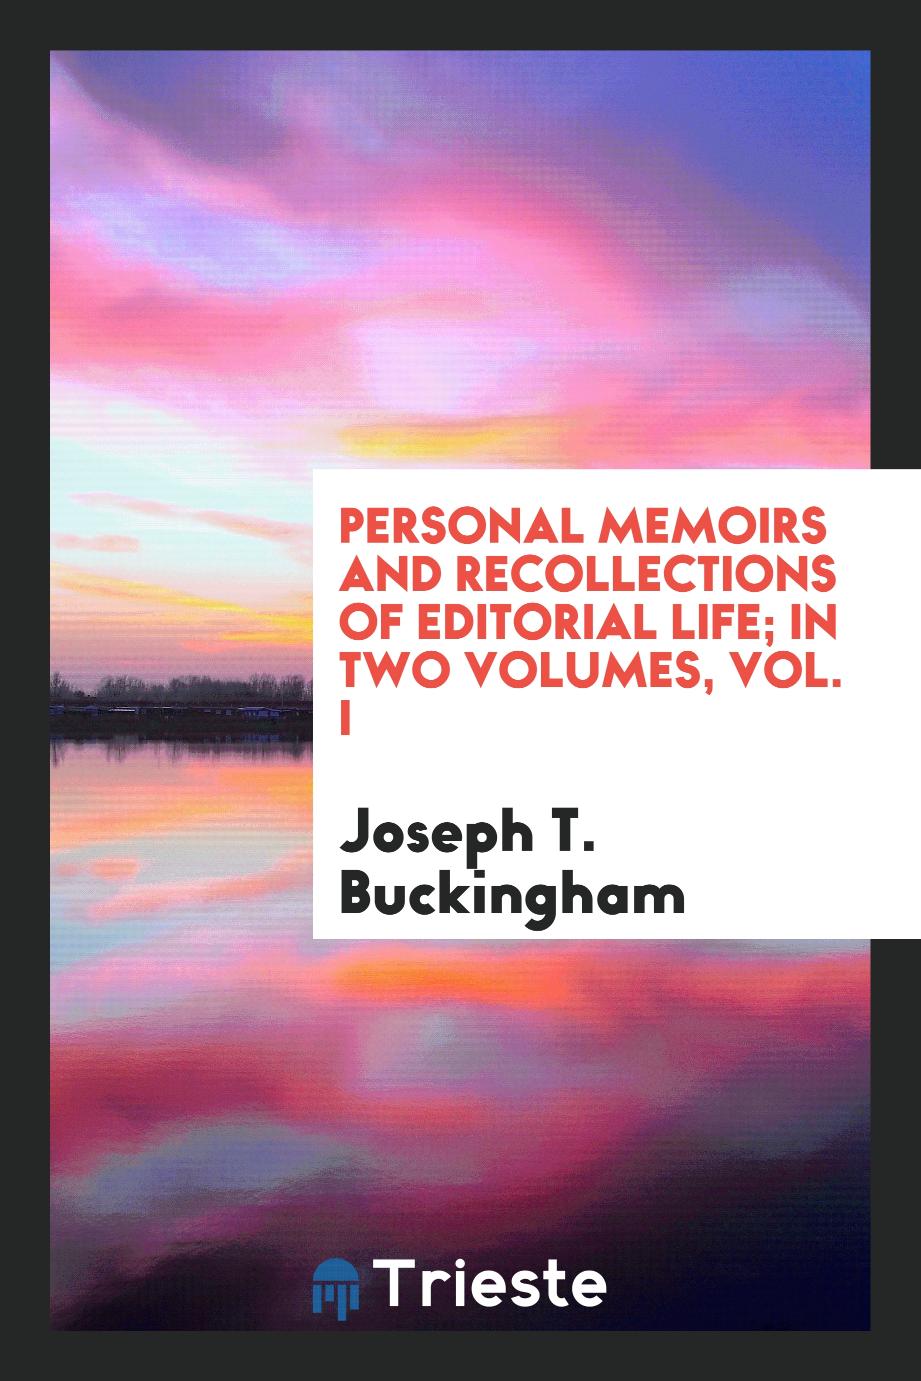 Personal memoirs and recollections of editorial life; In two volumes, Vol. I